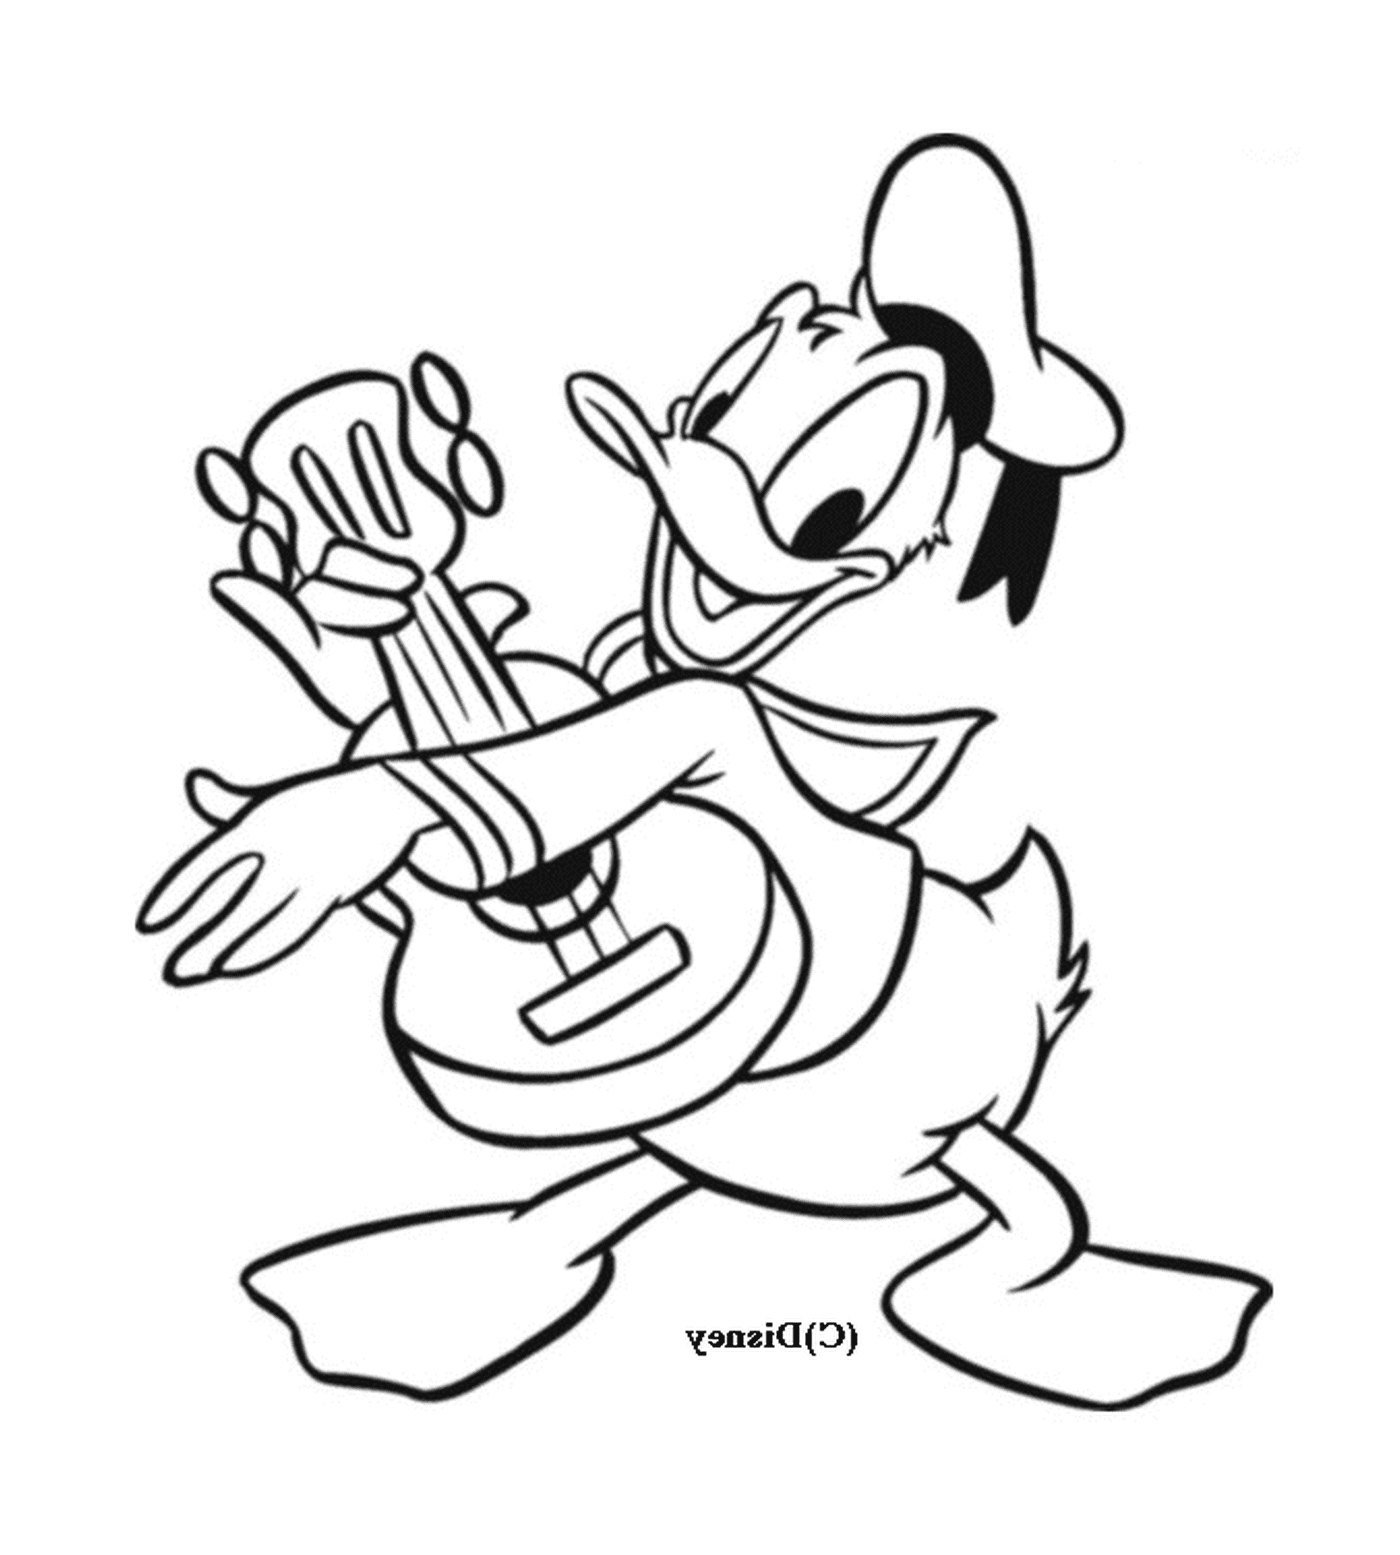  Donald excels in music with his guitar 